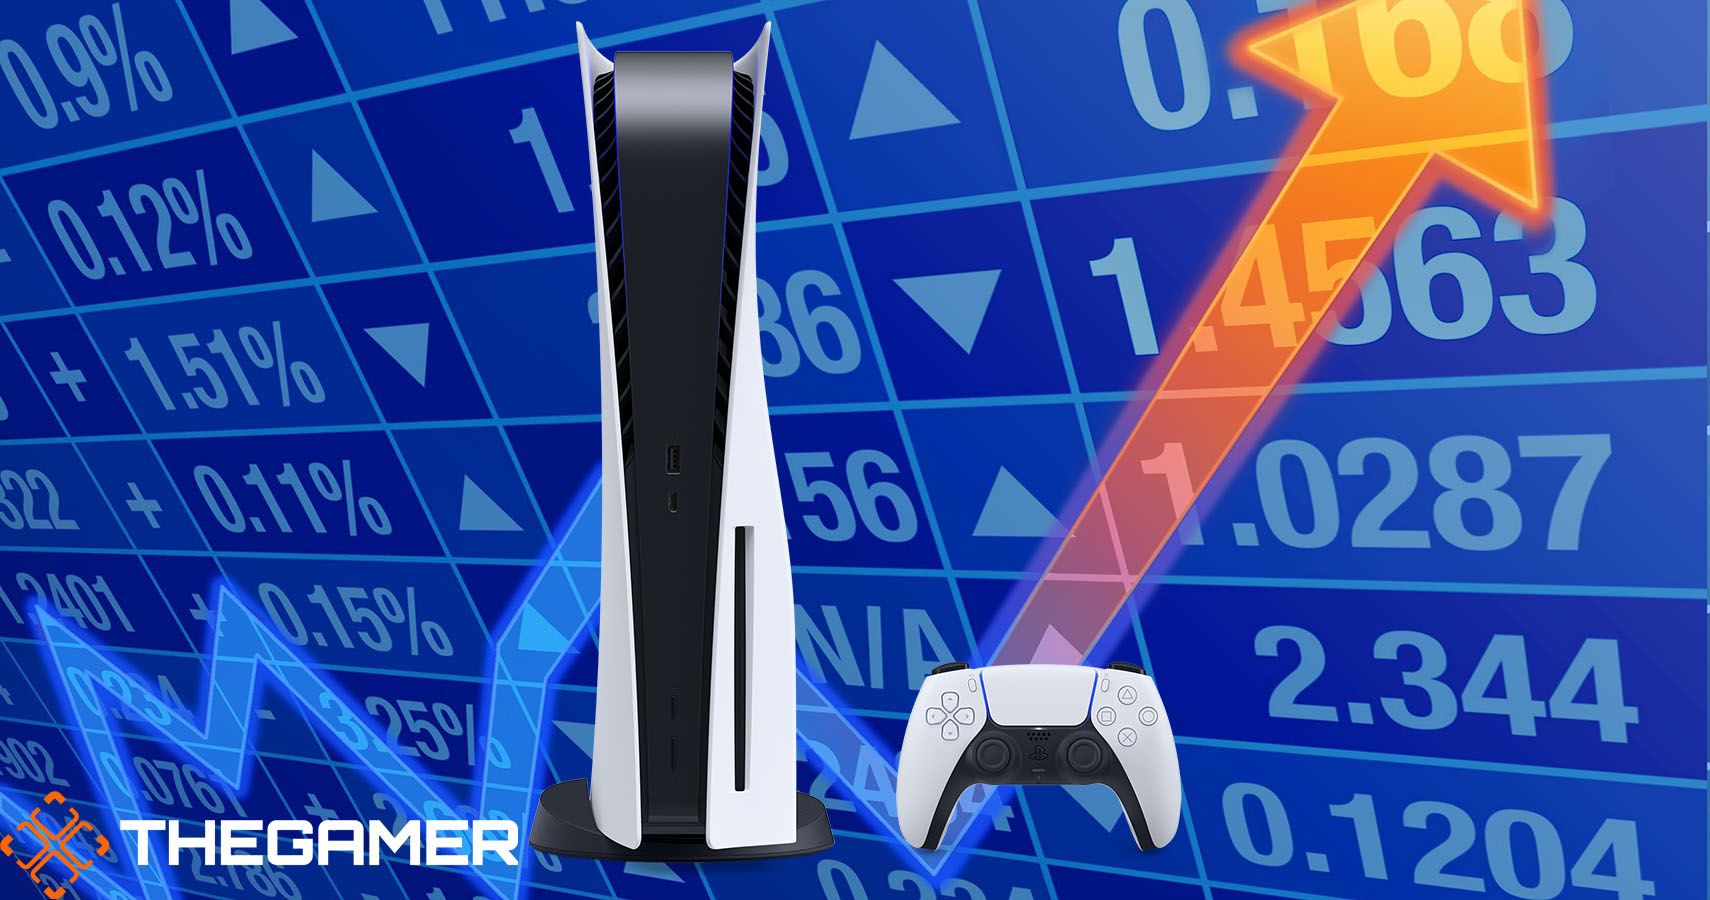 PlayStation 5 console over a background of numbers and an upward arrow